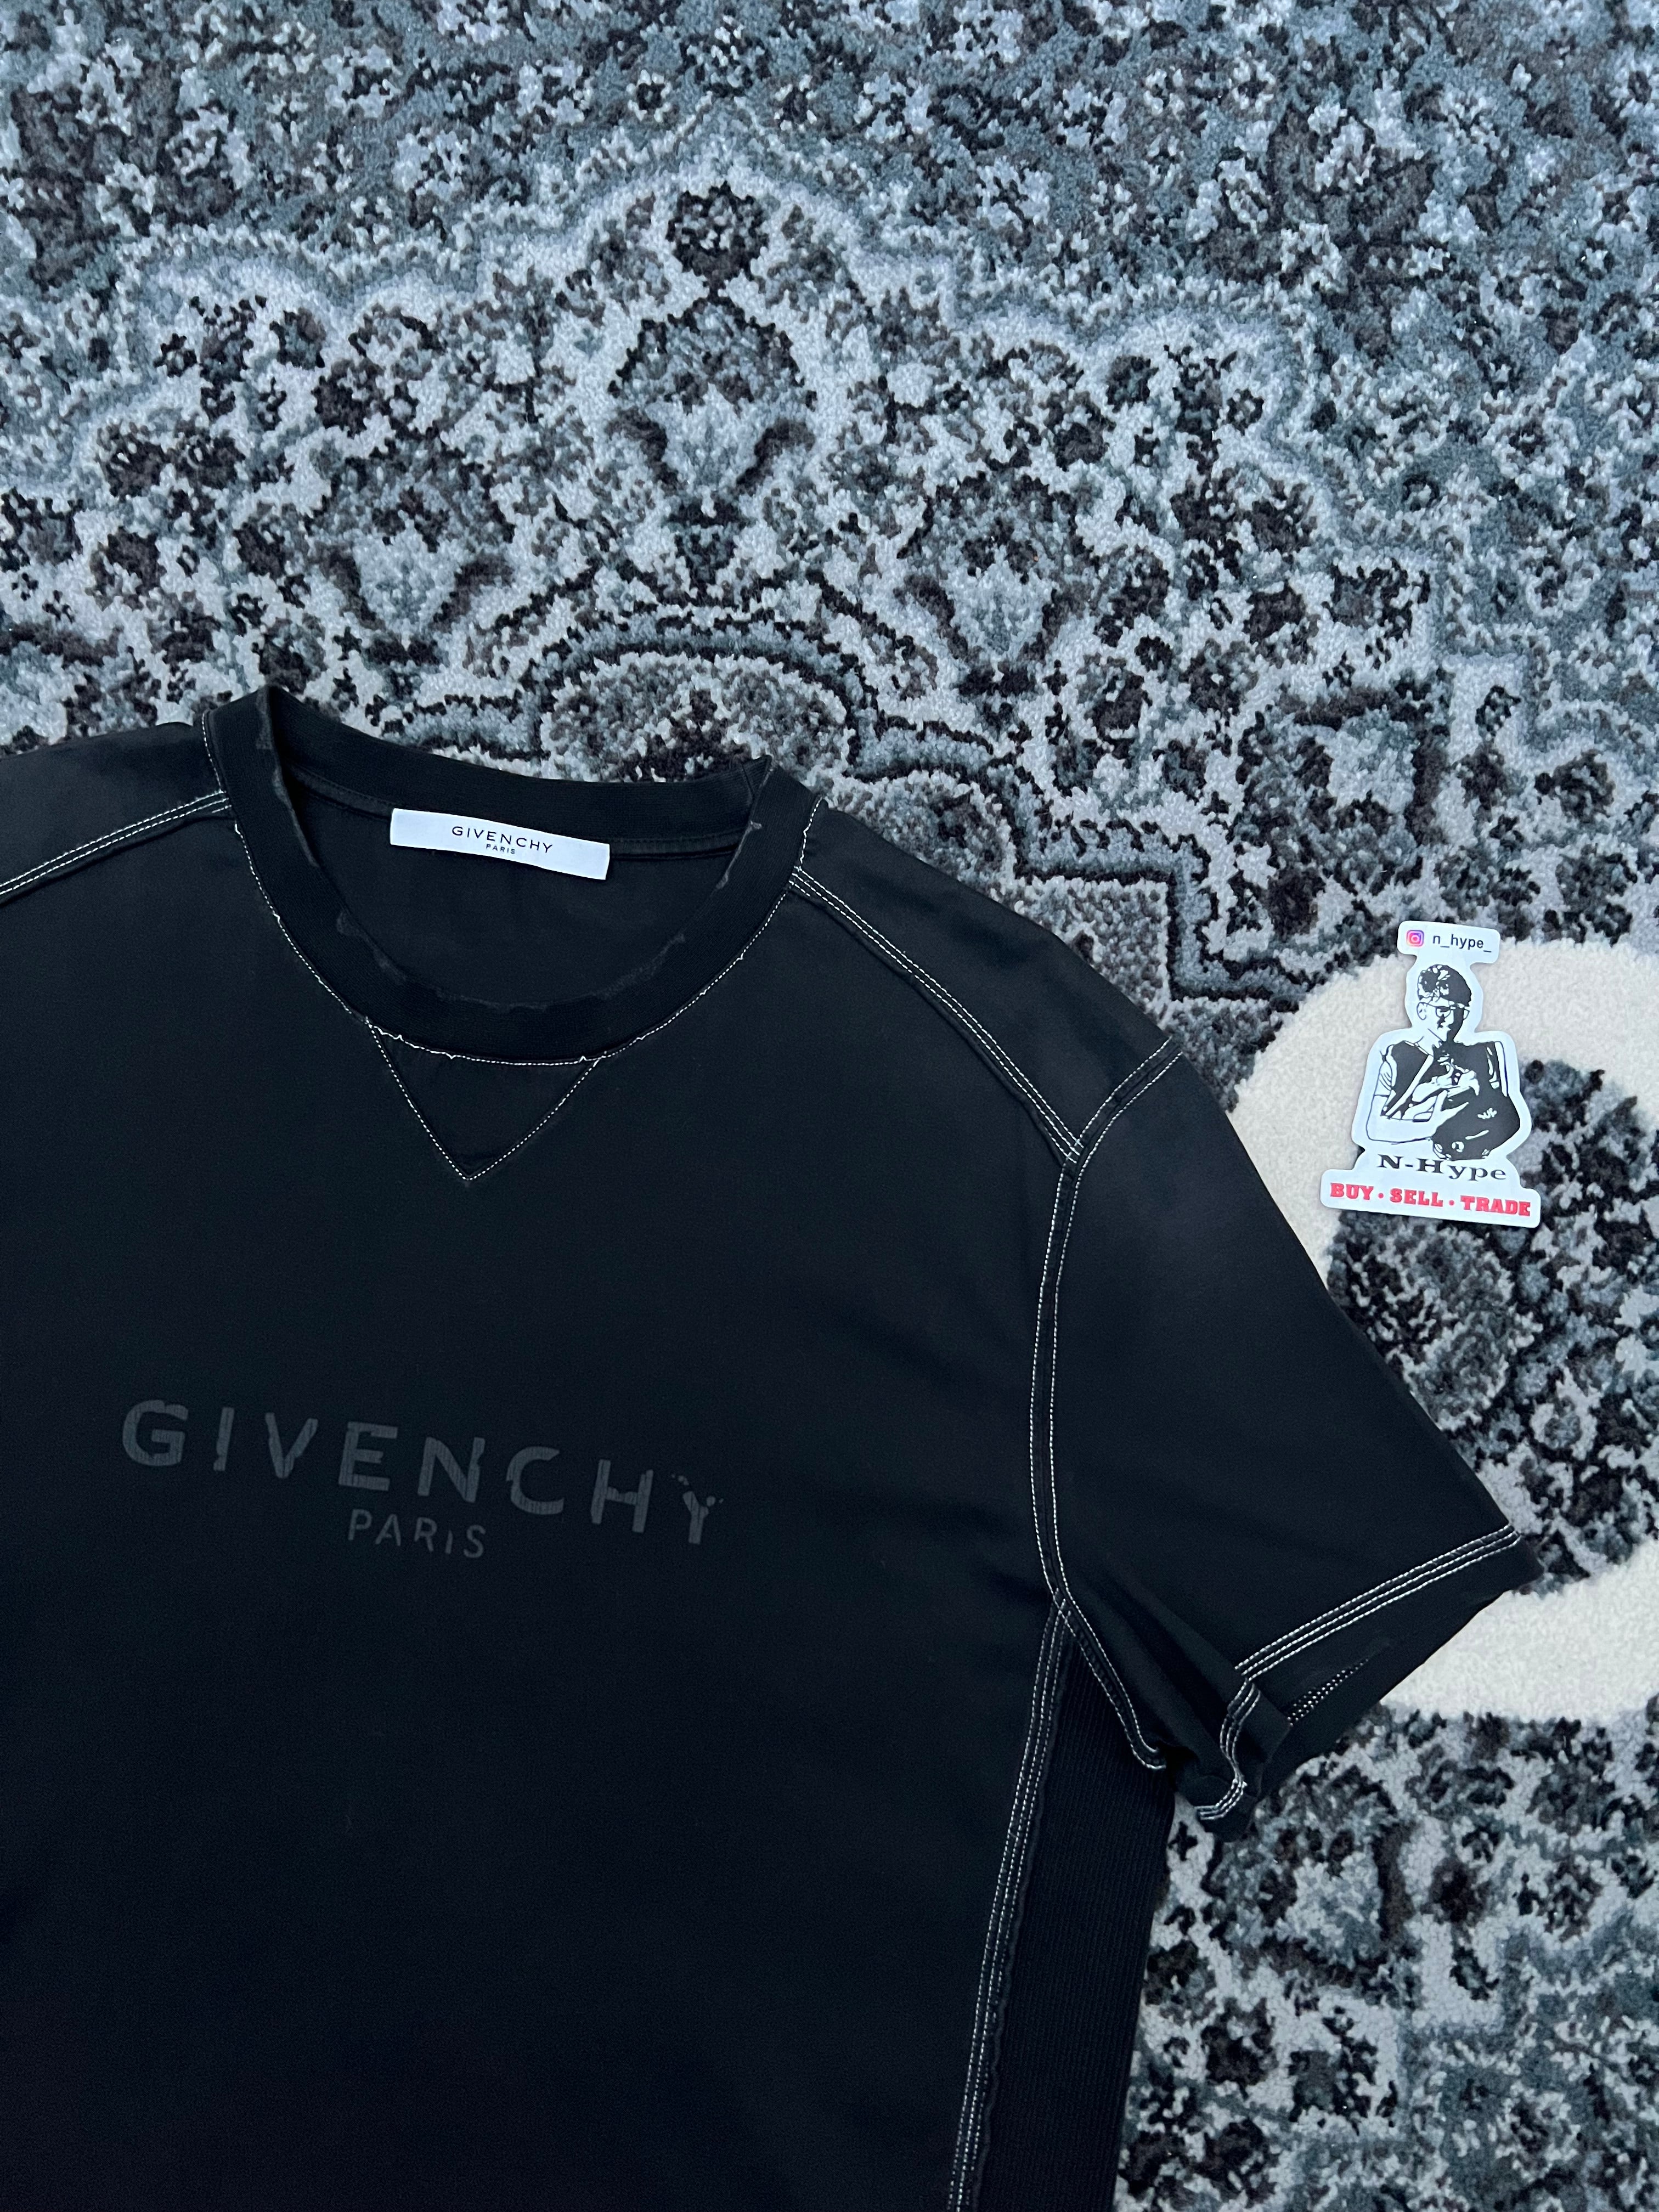 Givenchy Pre-owned Cotton Top Shirt Black